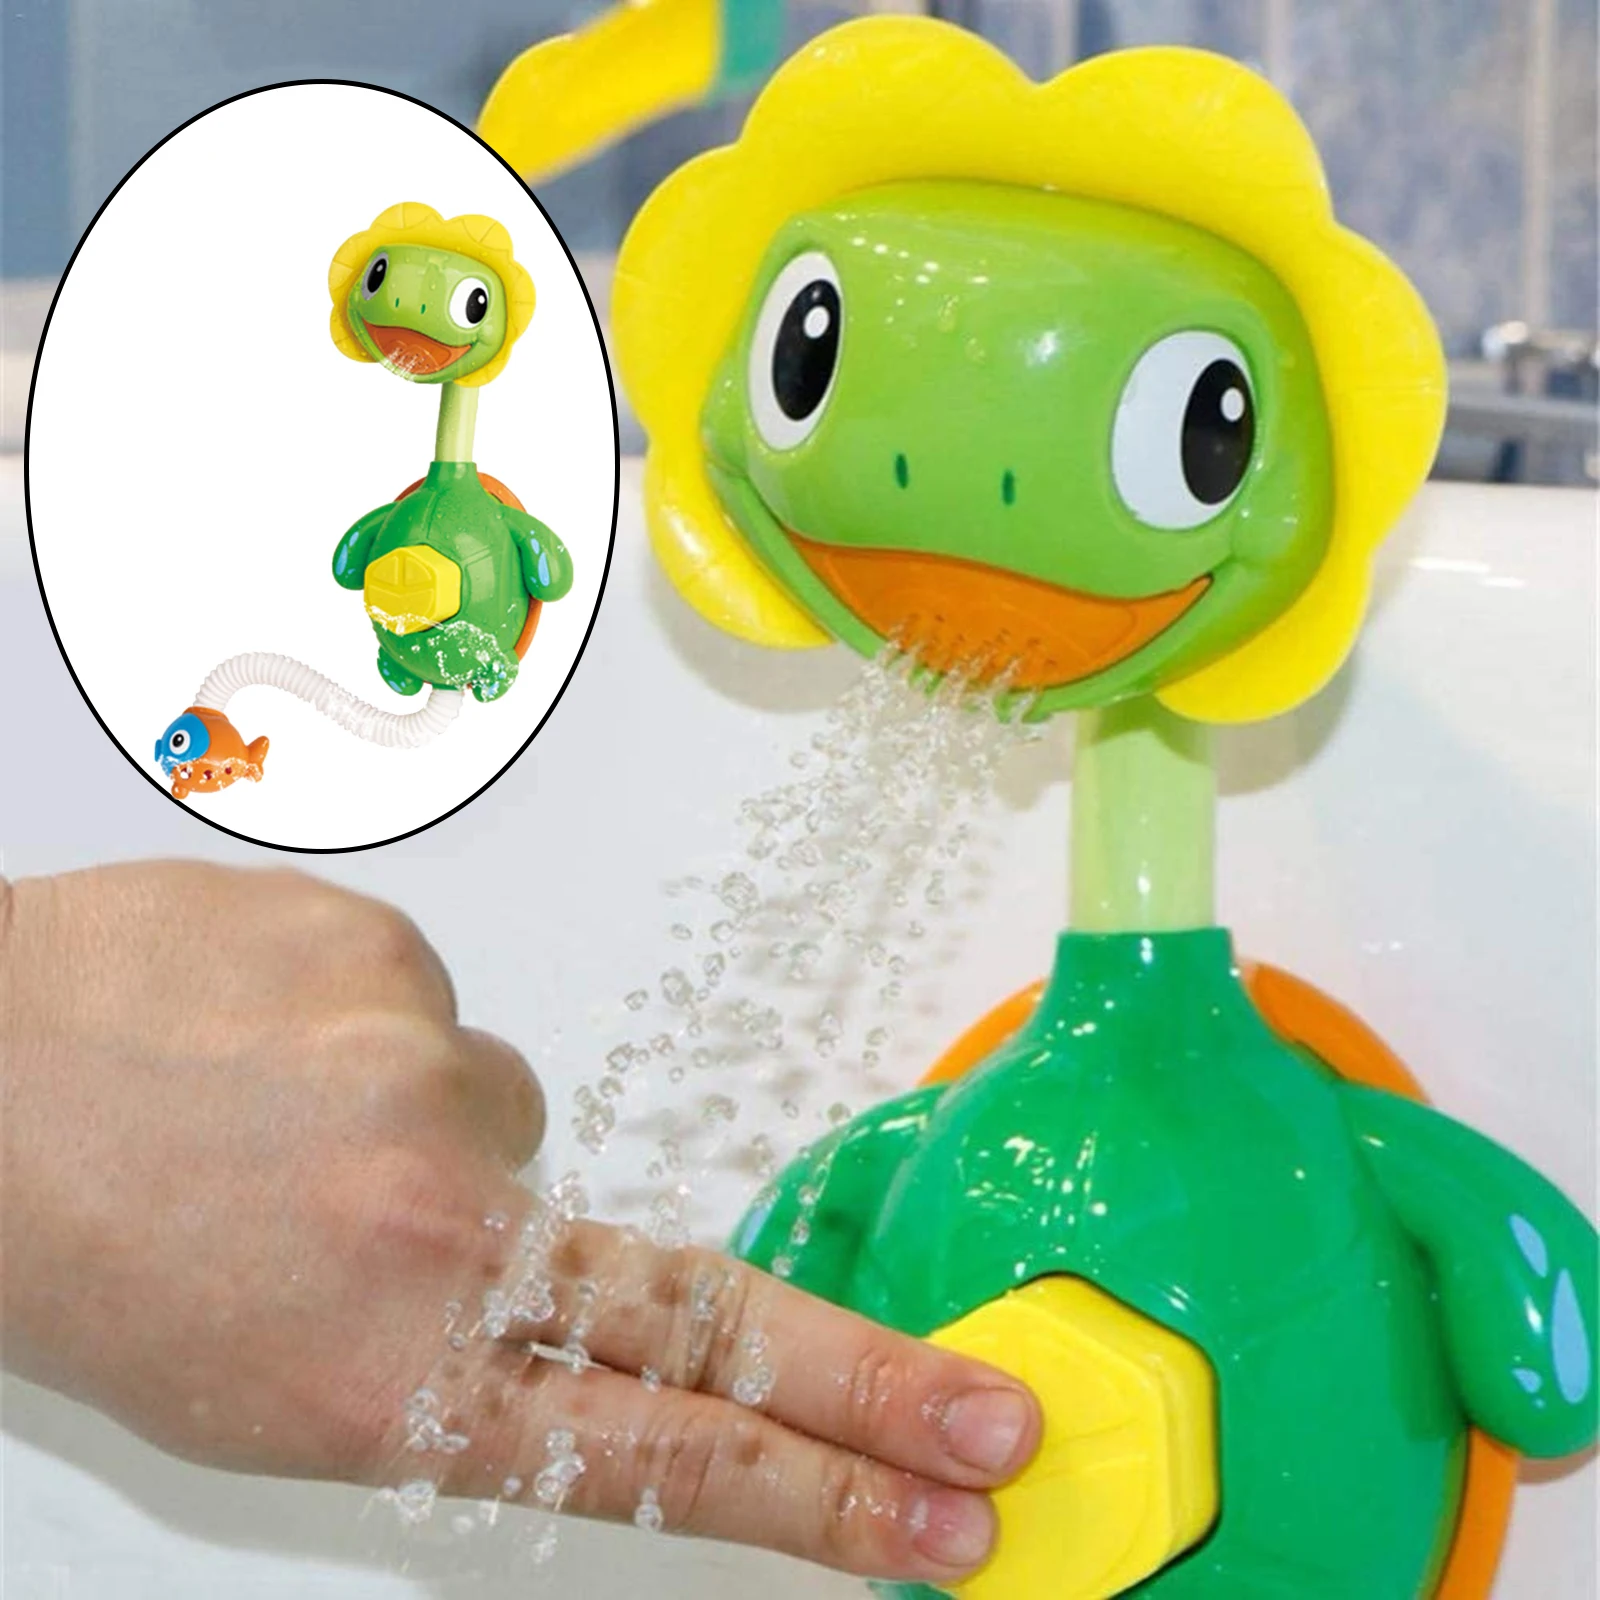 Baby Bath Toy Turtle-shaped Bathtub Sink Shower Water Game Toys Accessories